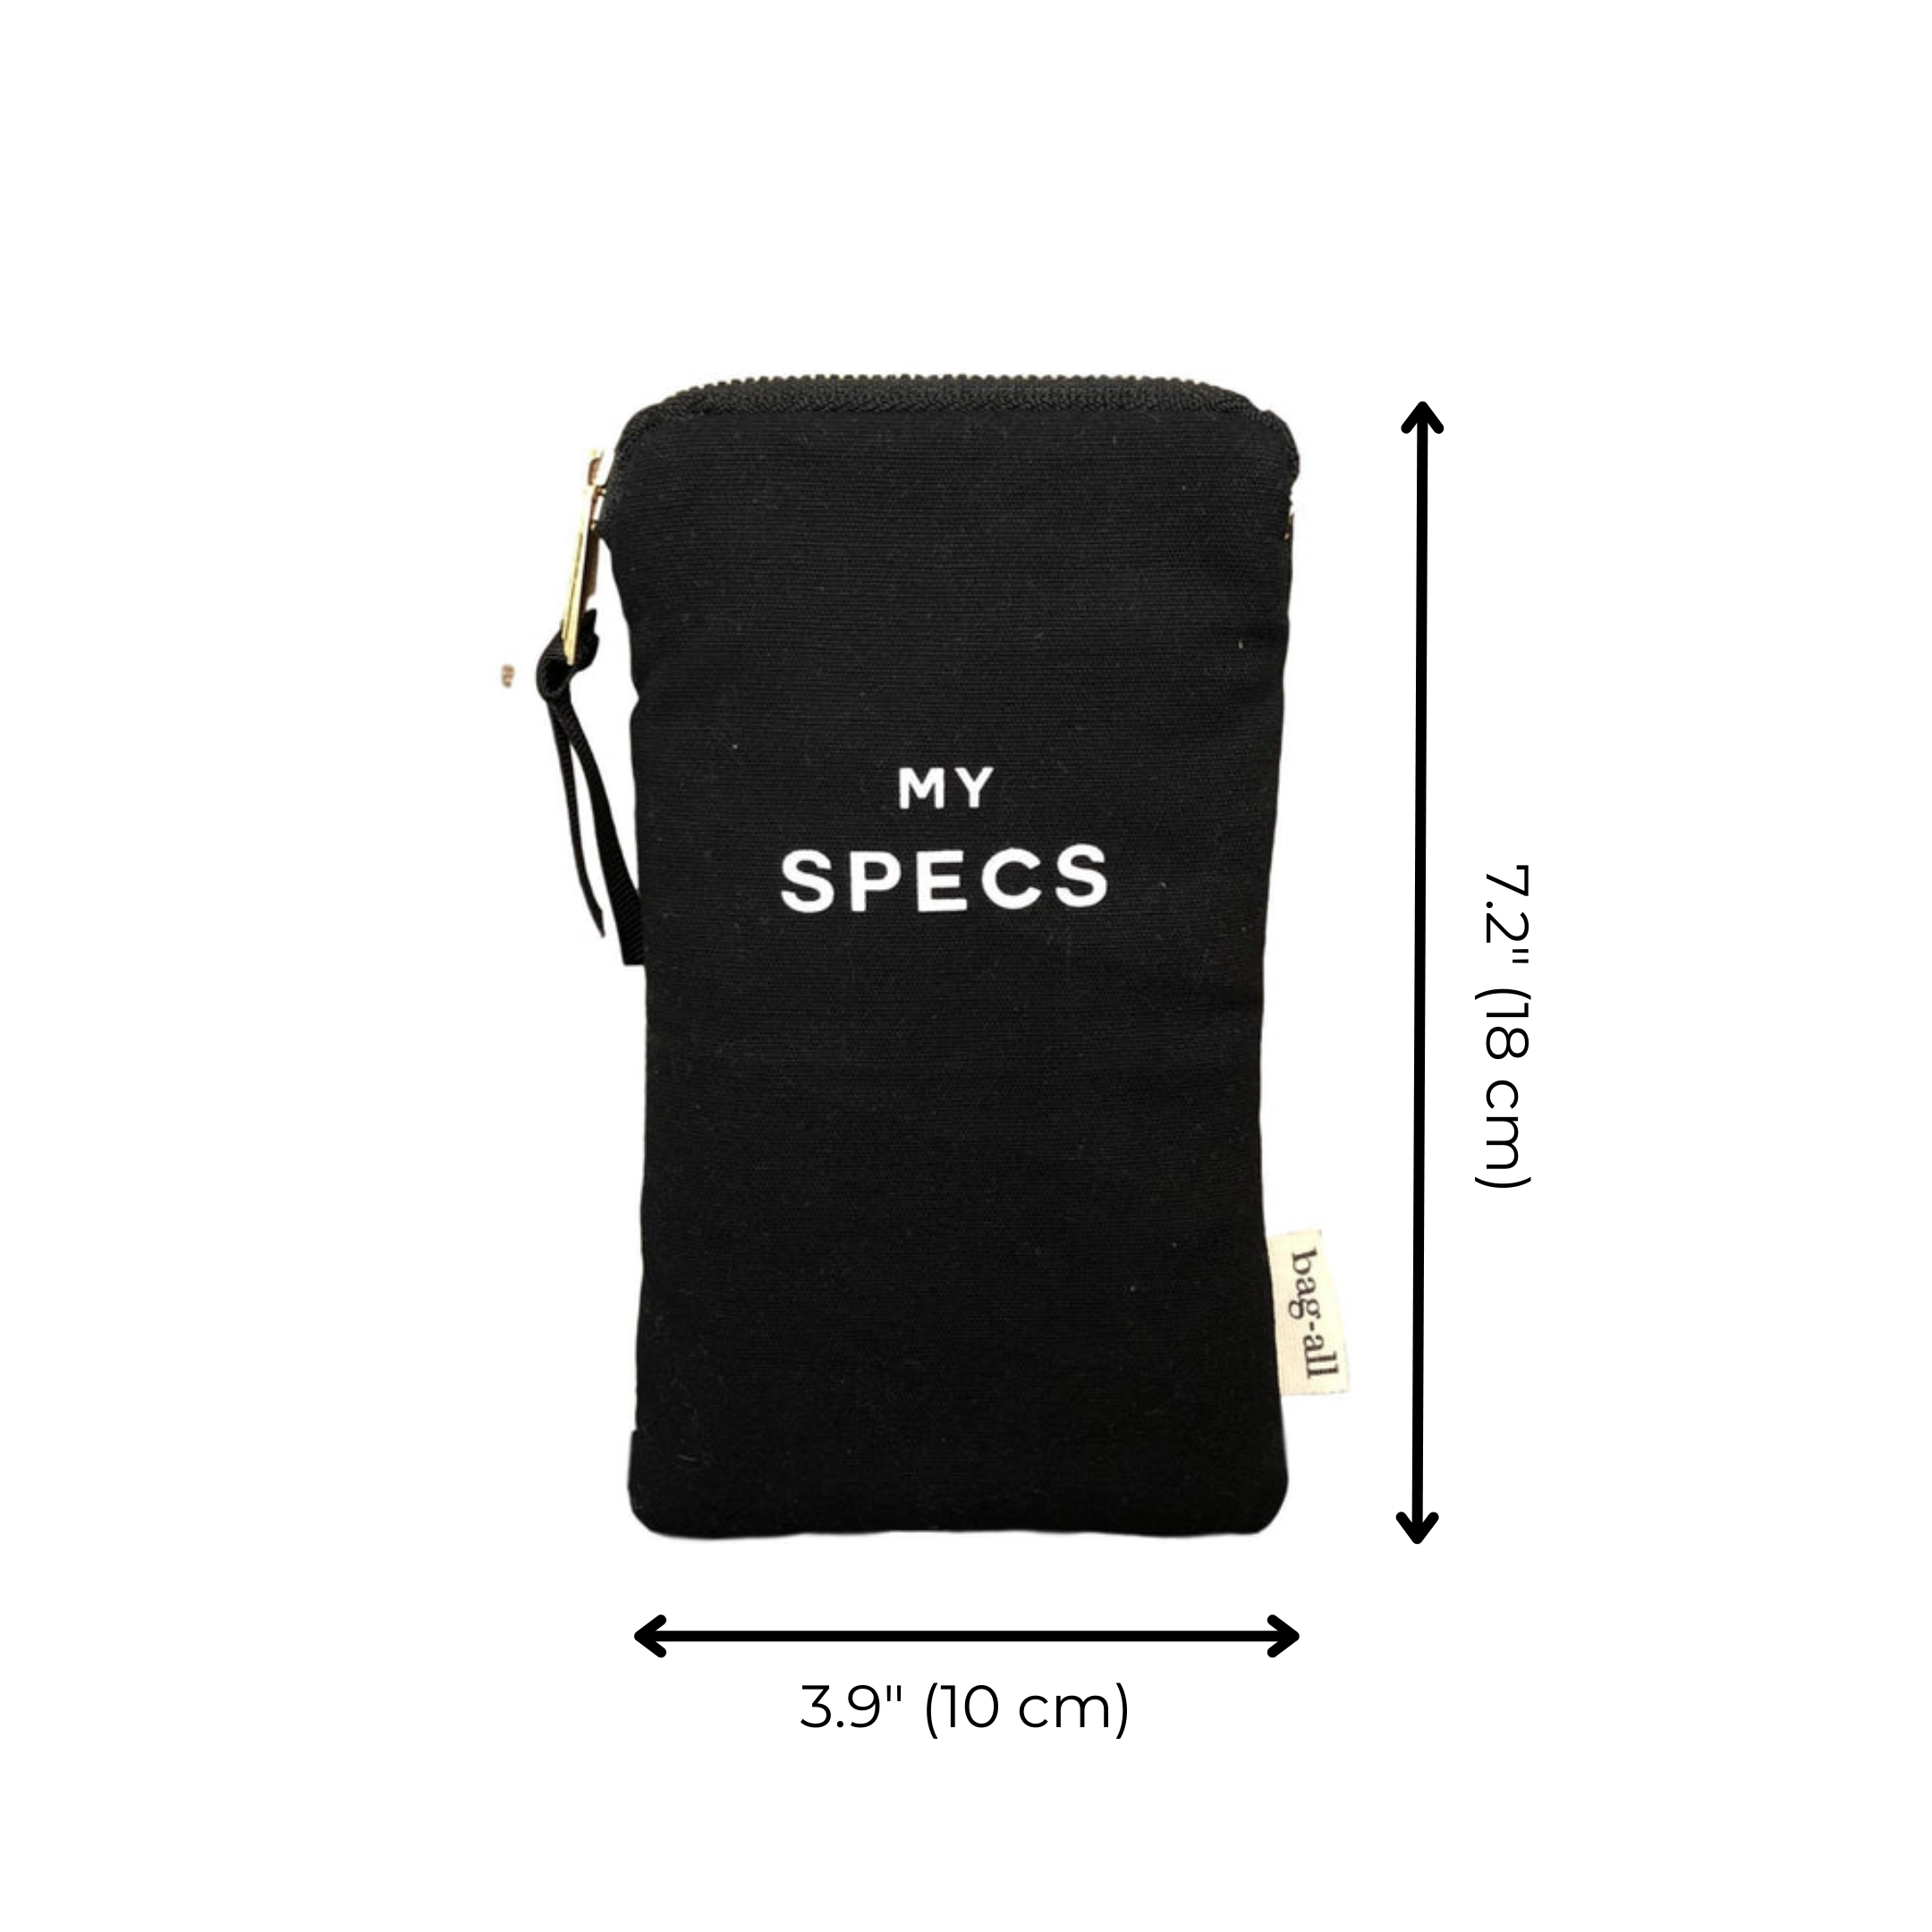 My Specs Glasses Case with Outside Pocket, Black - Bag-all